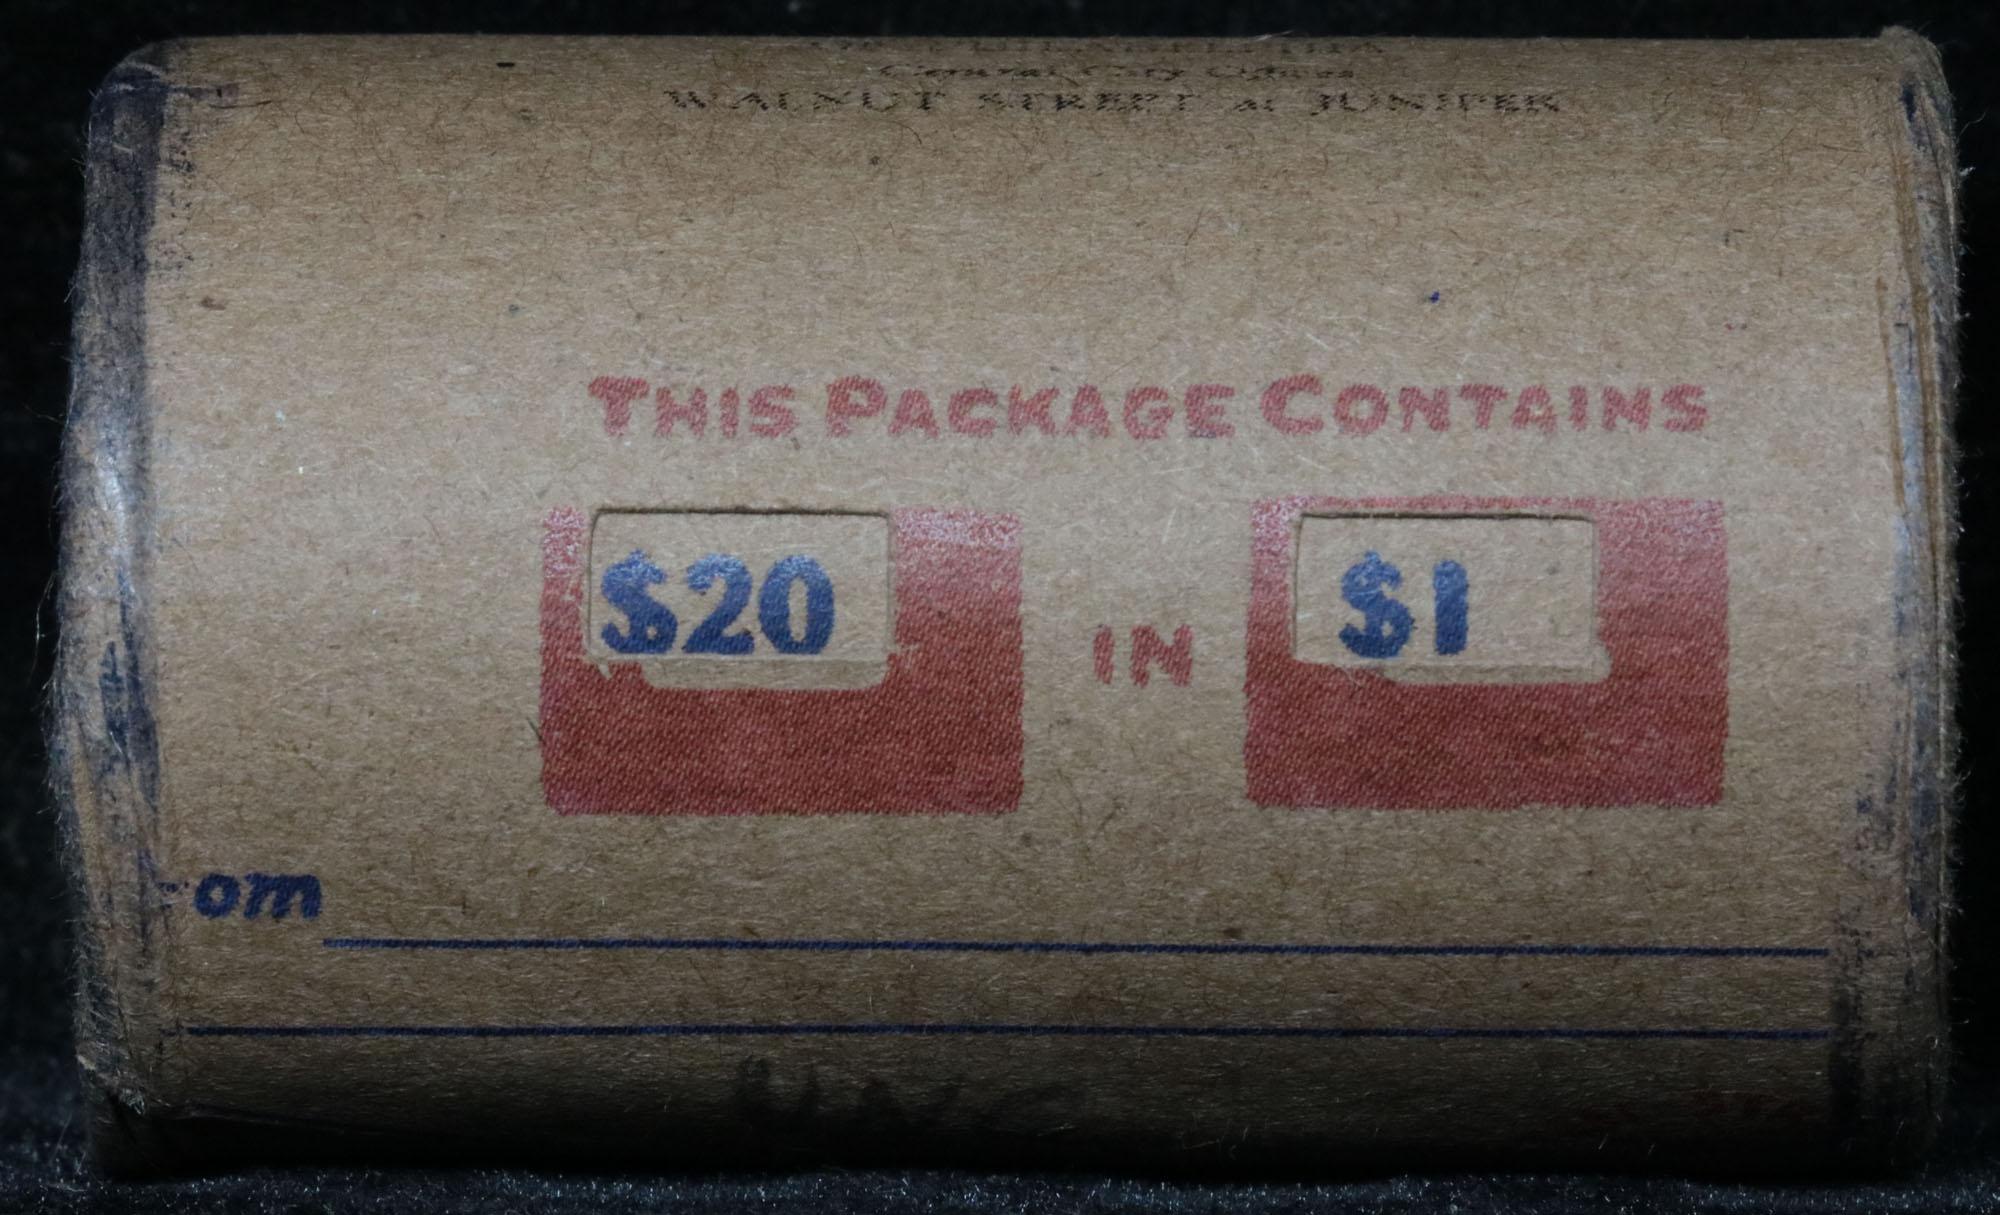 **Auction Highlight** Incredible Find, Uncirculated Morgan $1 Shotgun Roll w/1889 & cc mint ends